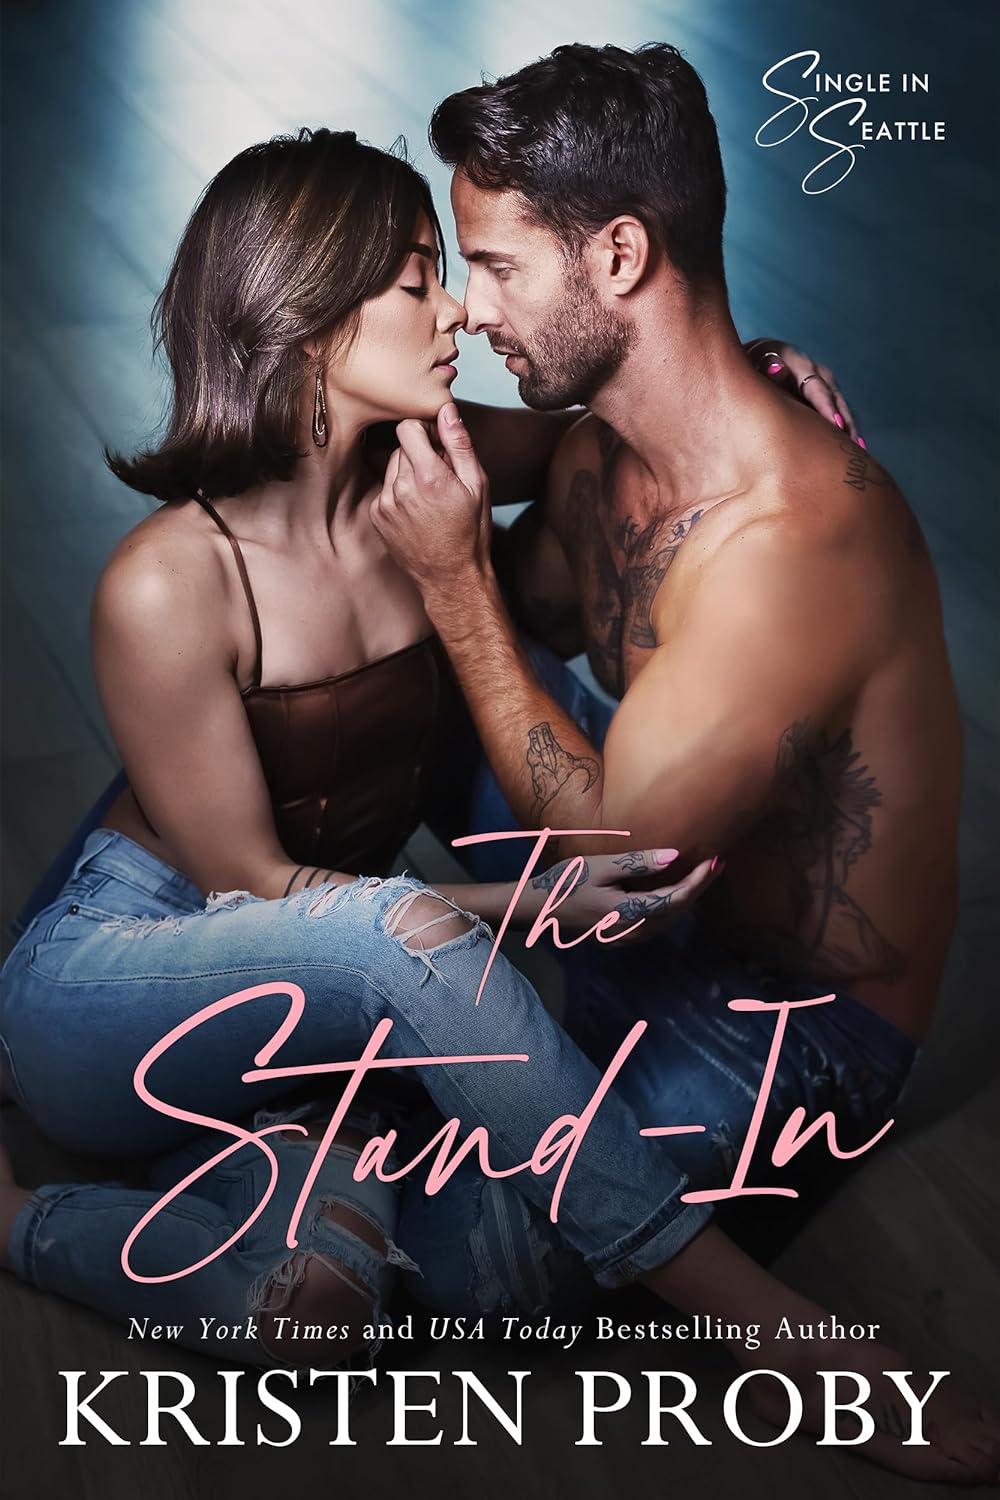 The Stand-In: A Single in Seattle Novel by Kristen Proby